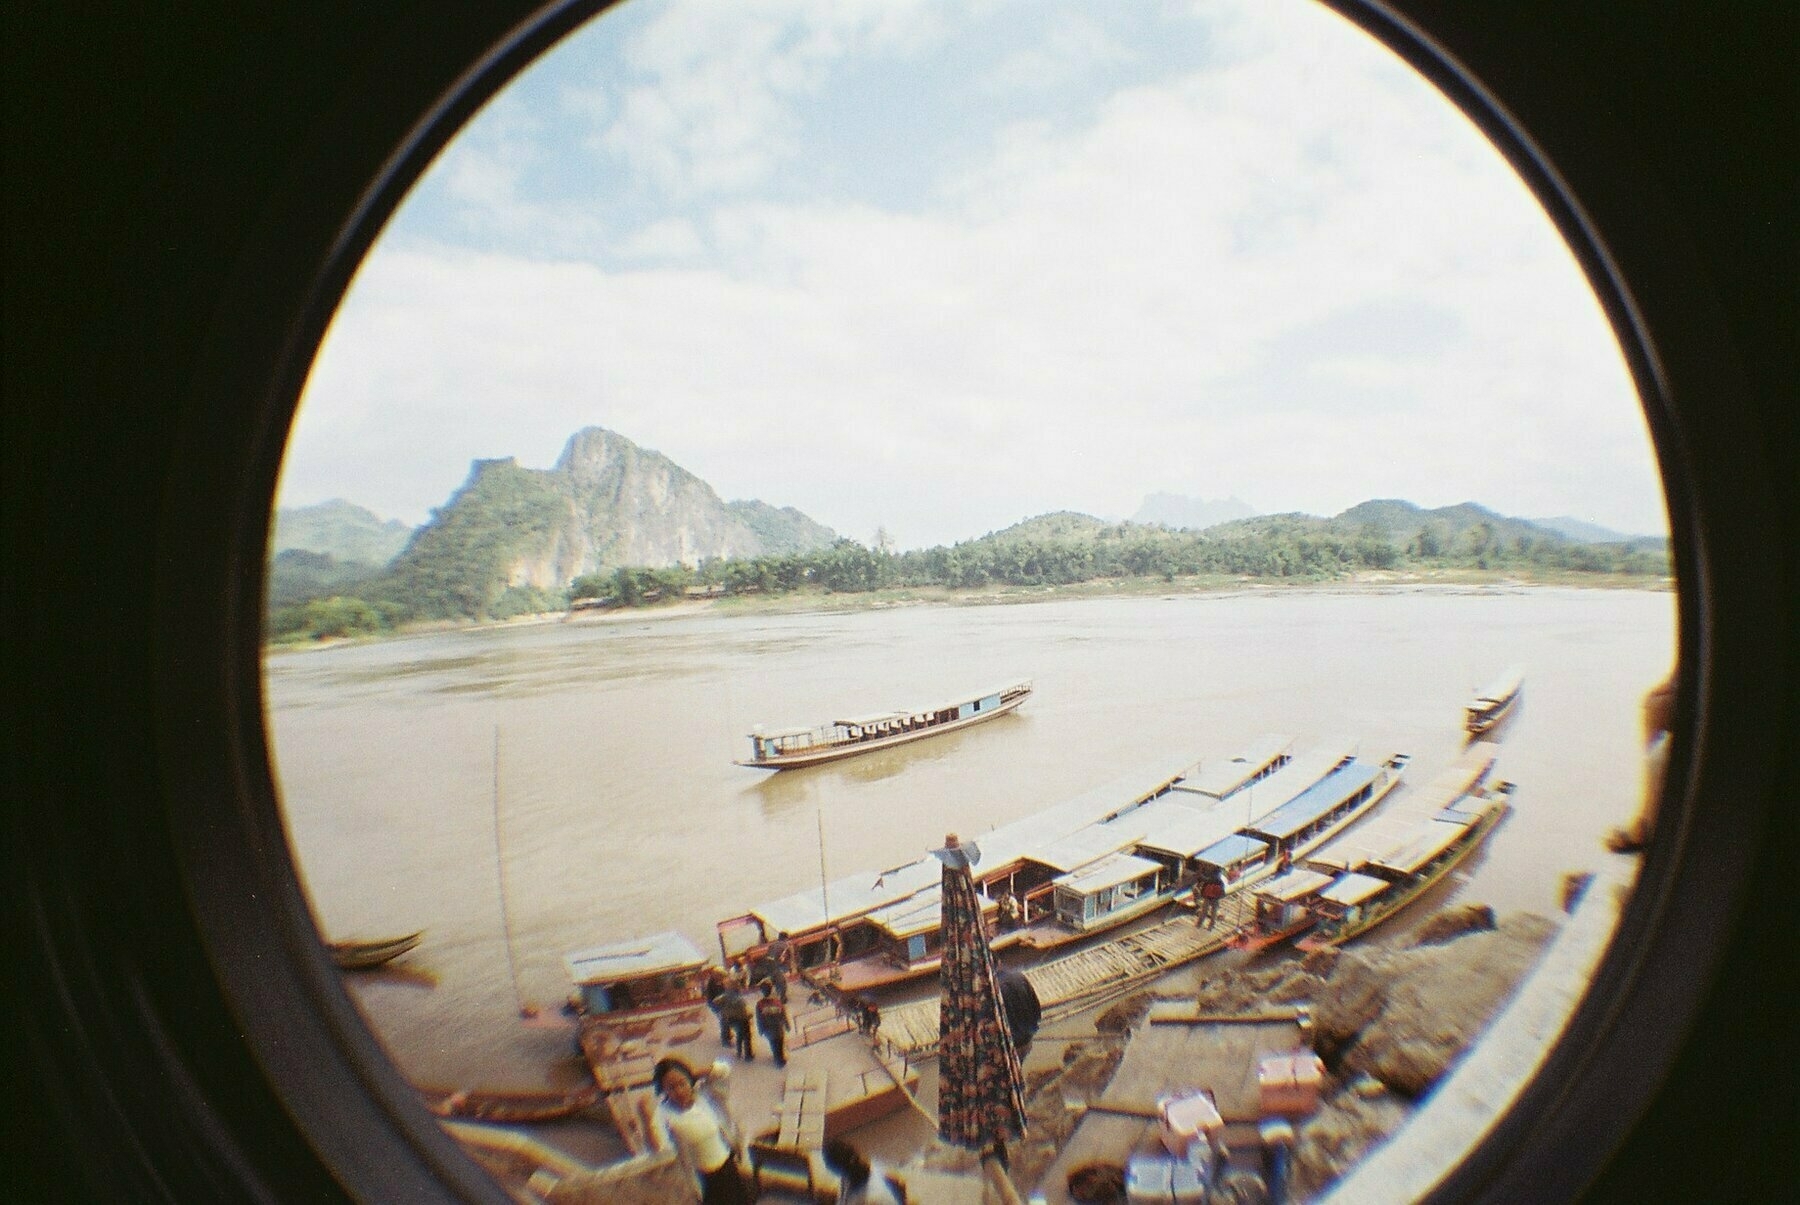 a scan of a color photograph shot with a fish eye lens showing the river and boats outside a buddhist cave in Laos in Southeast Asia